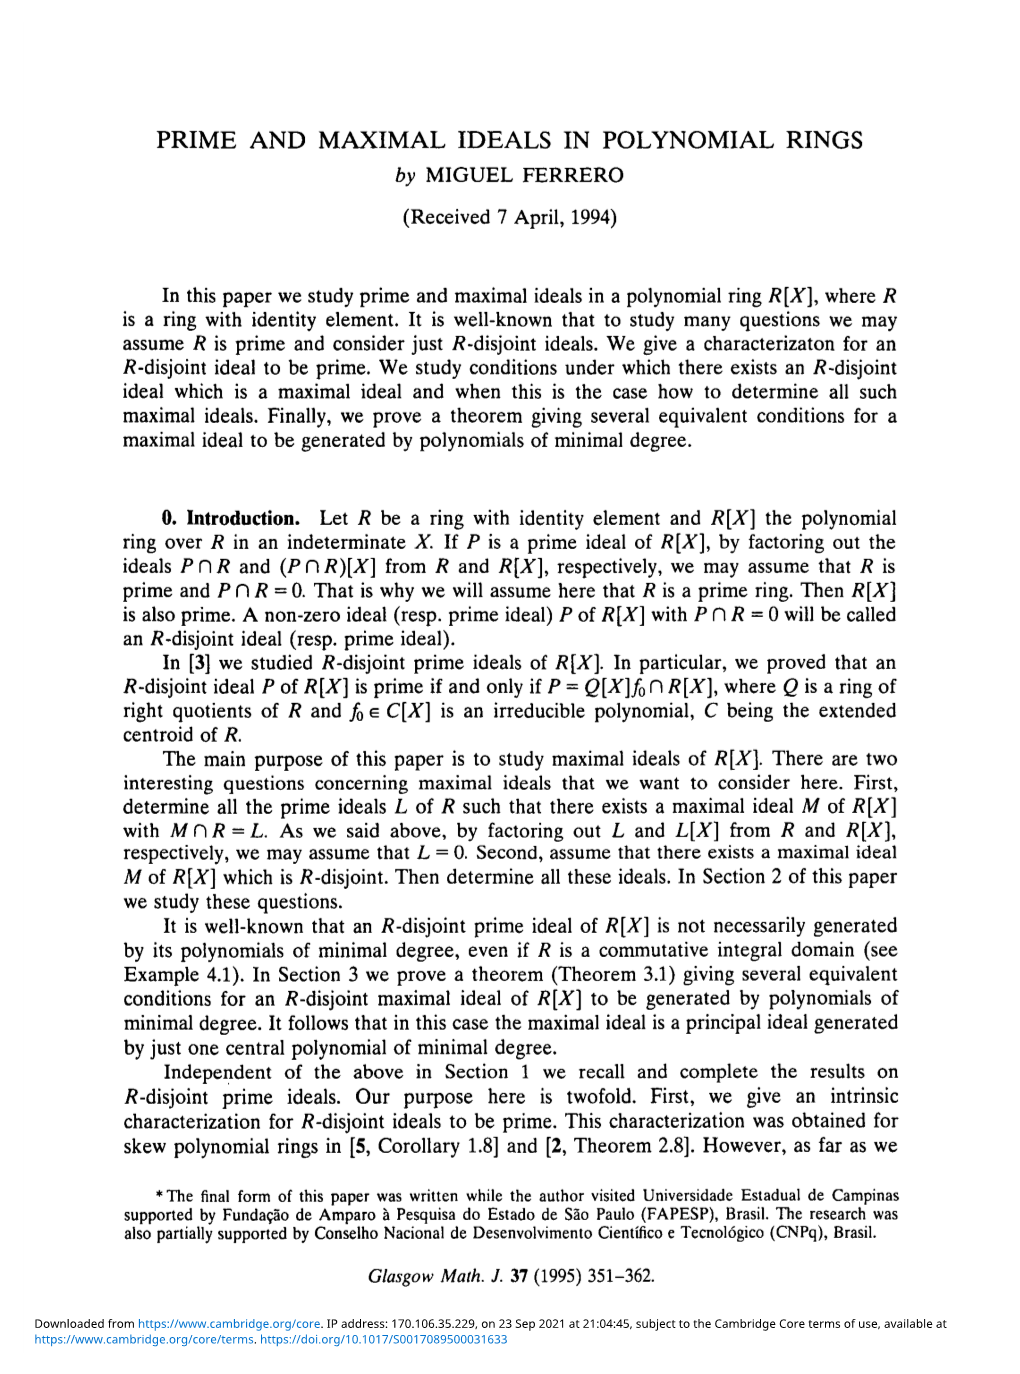 PRIME and MAXIMAL IDEALS in POLYNOMIAL RINGS by MIGUEL FERRERO (Received 7 April, 1994)